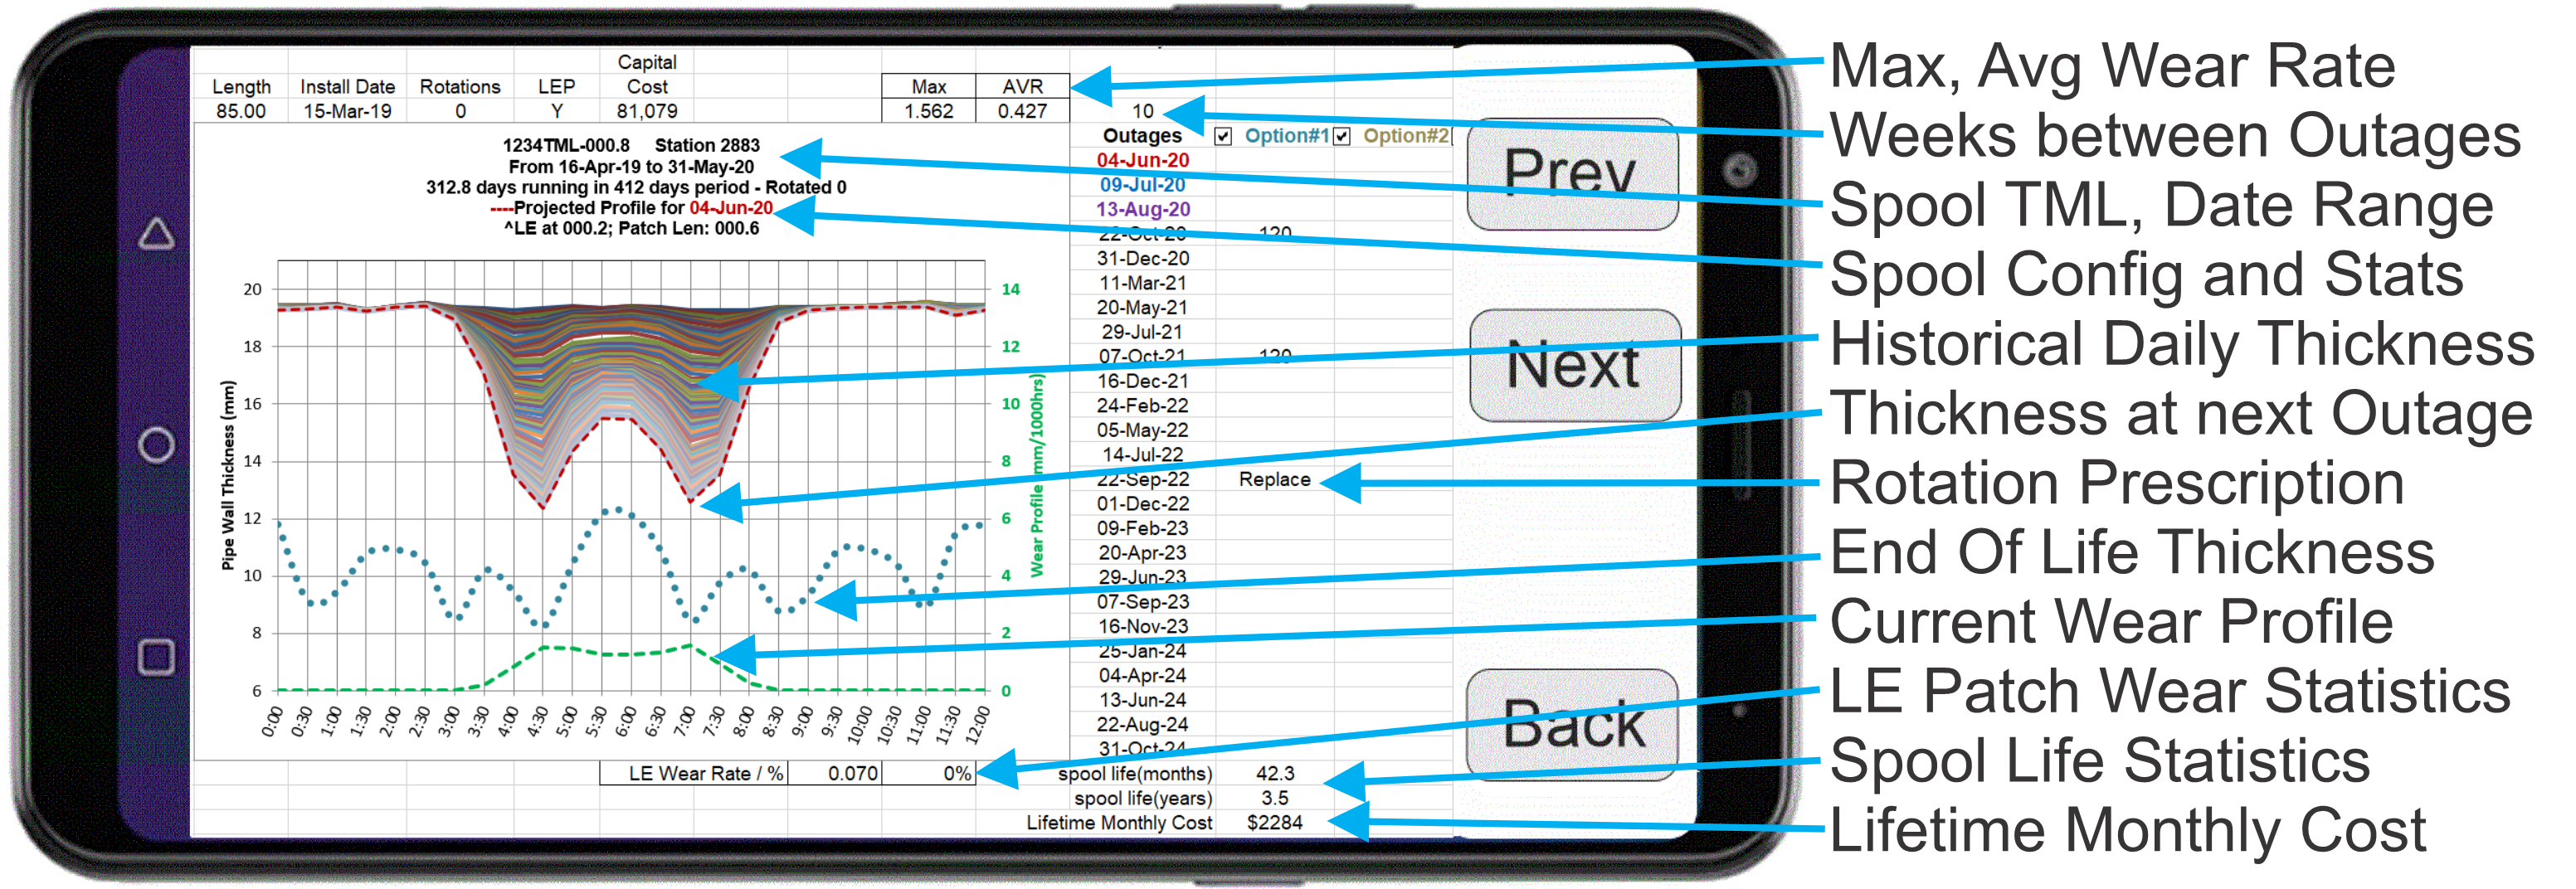 PIPVIEW analysis on a mobile phone